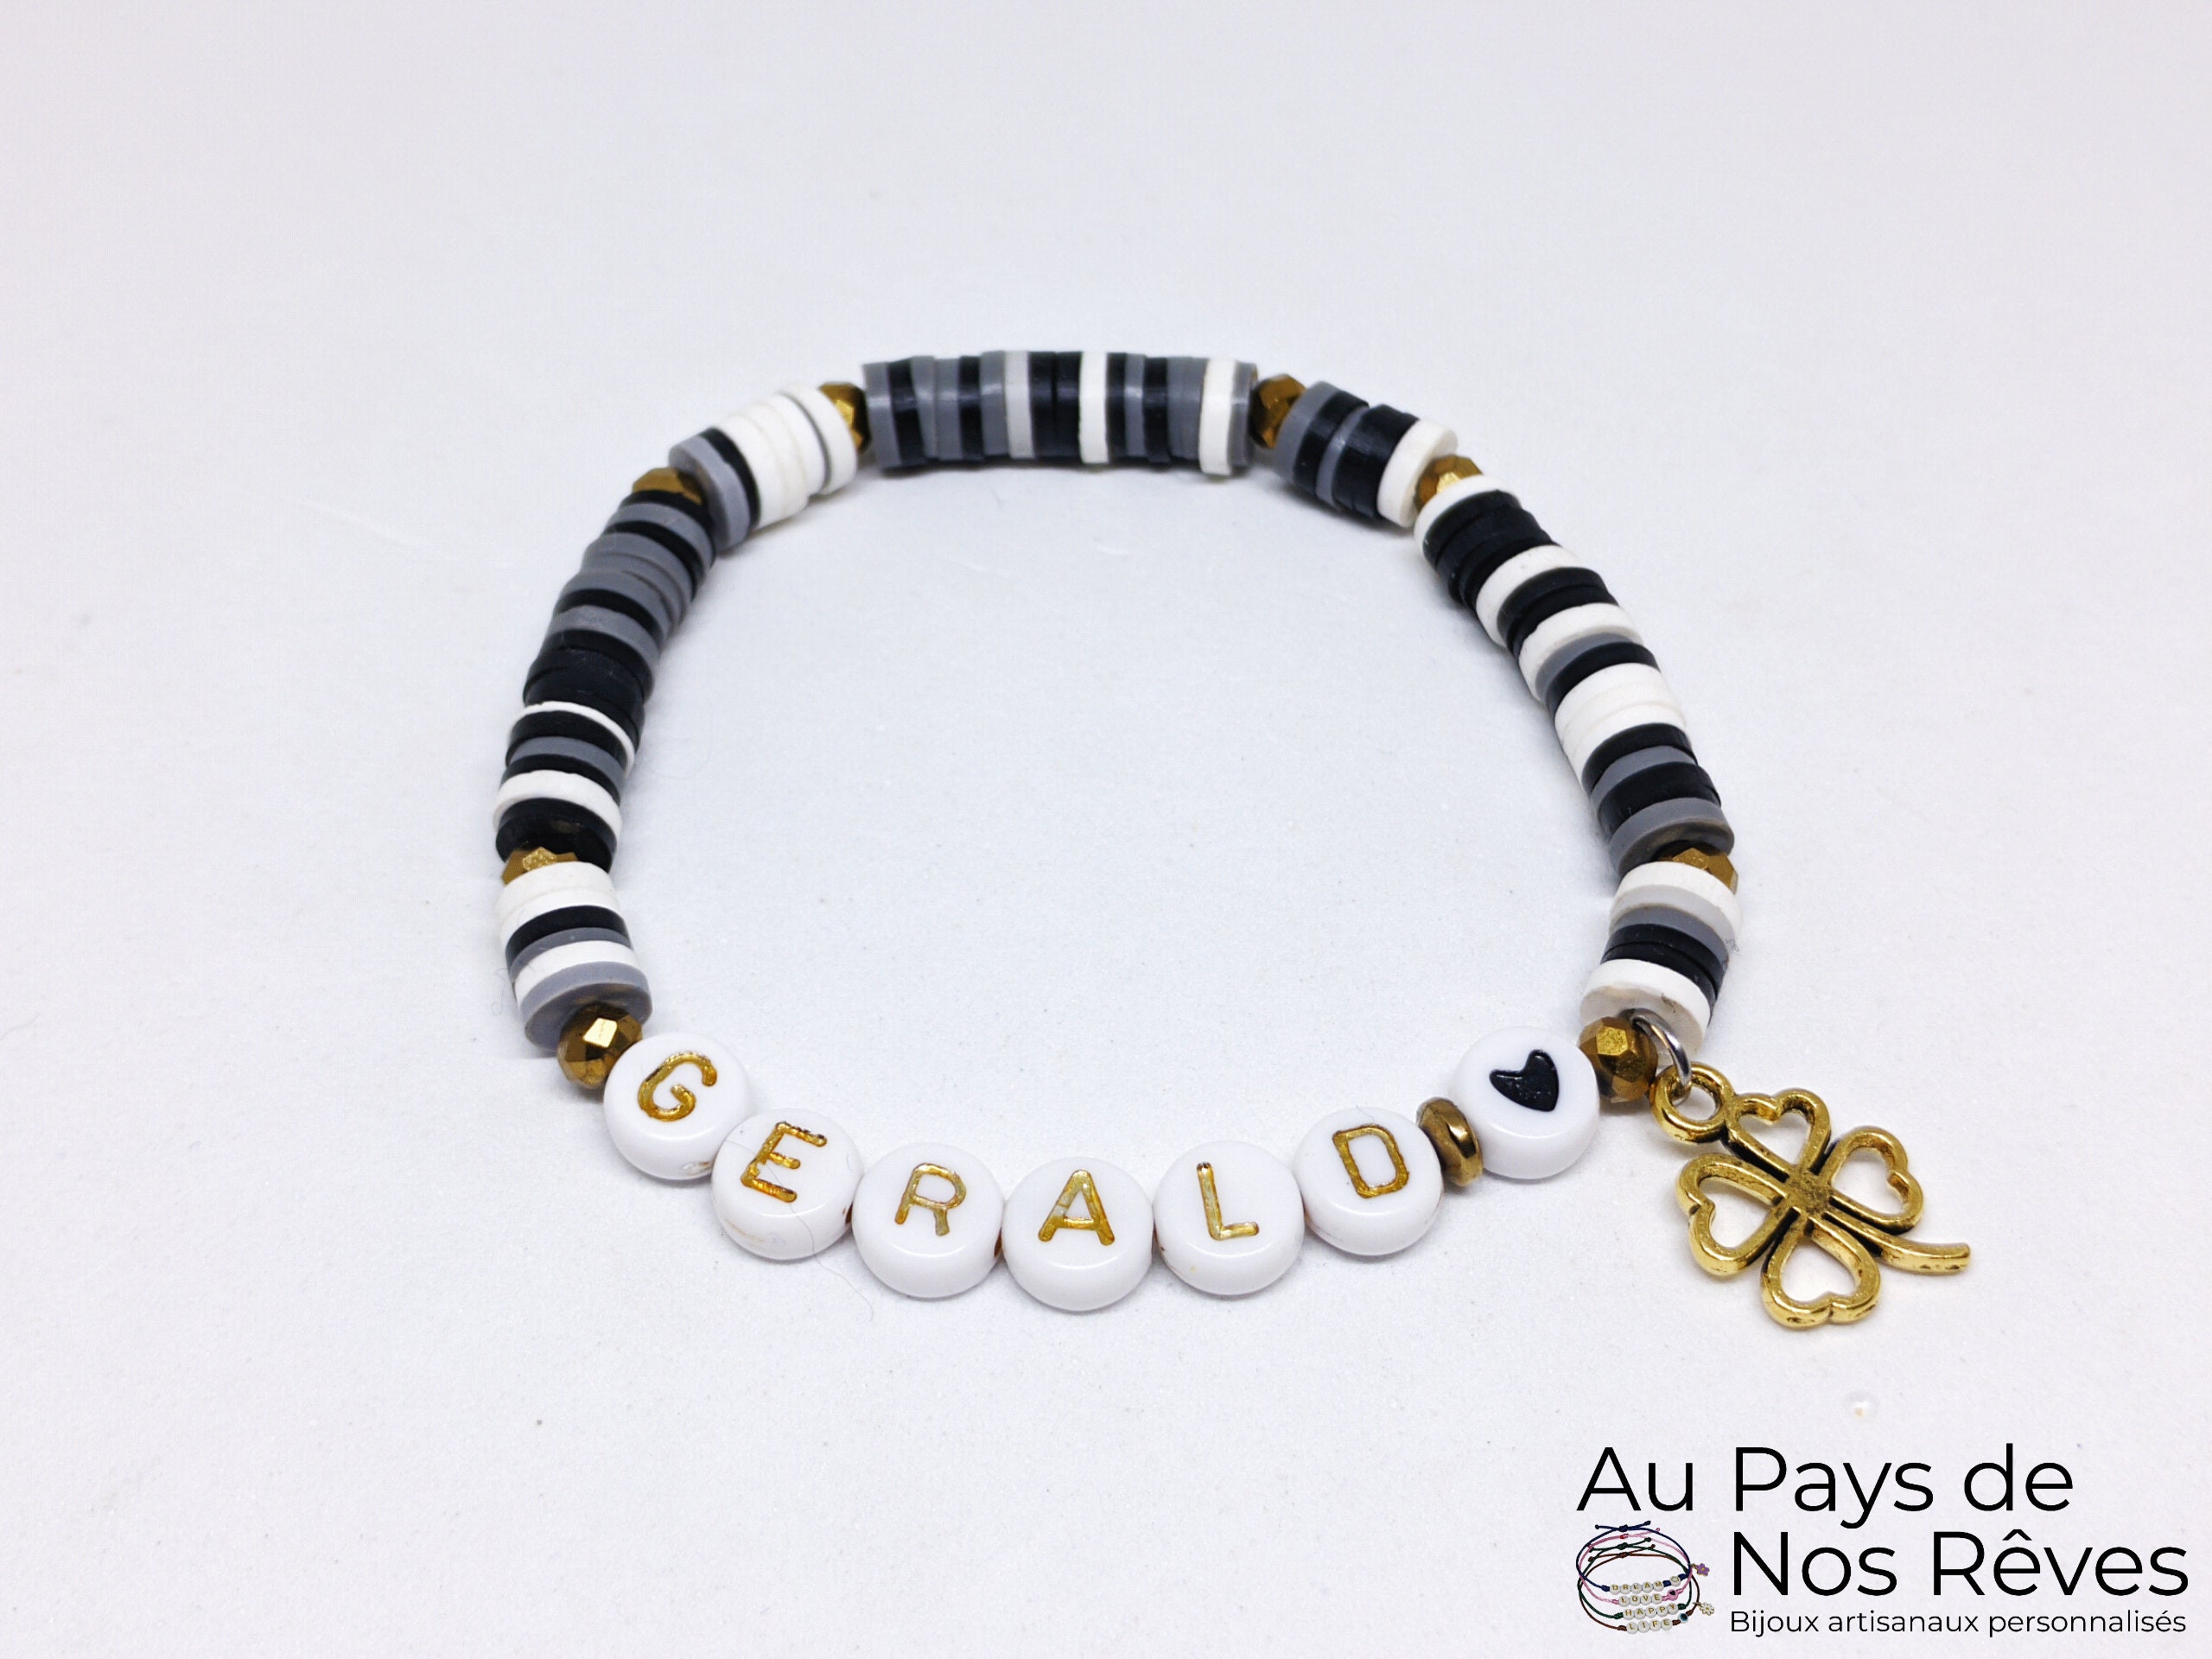 Personalised Child's Name Bracelet in 2 Colours With Glass Letter